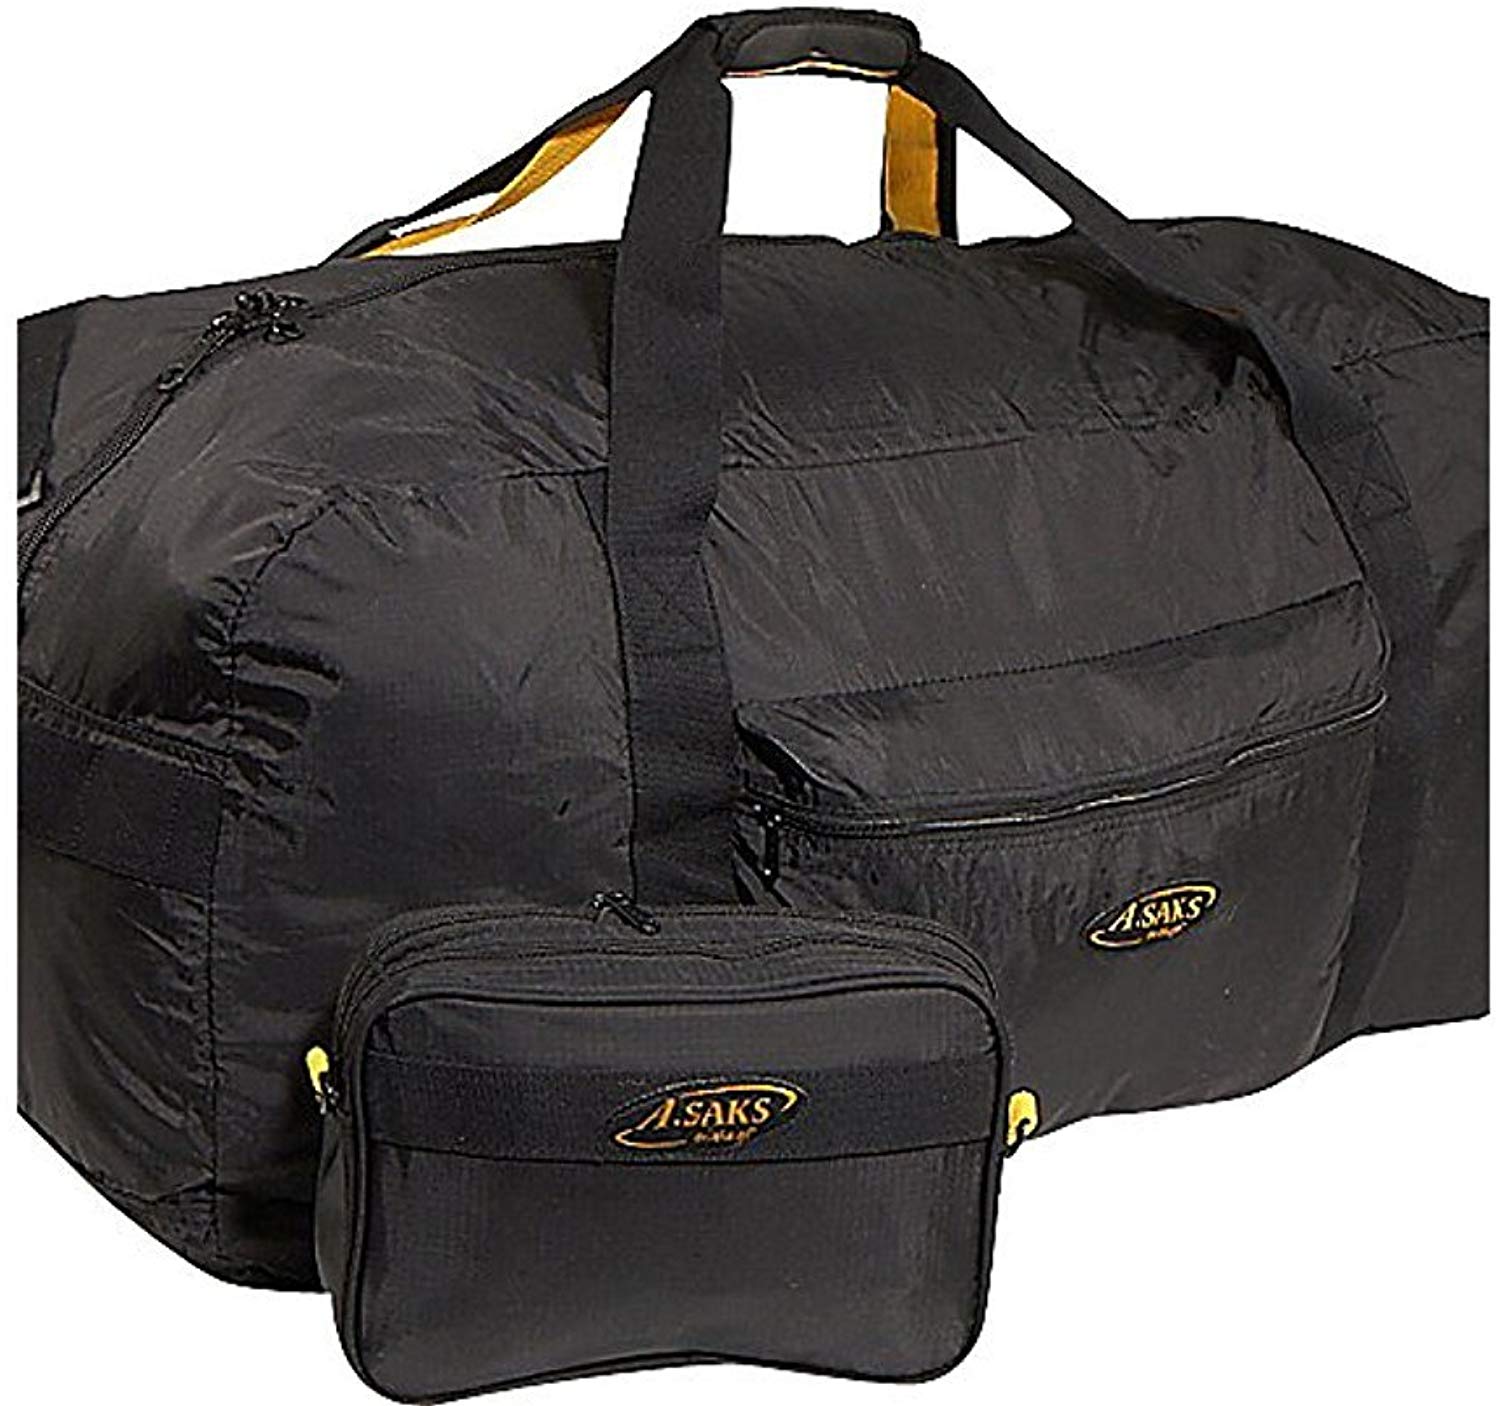 A. Saks 36" Long Duffle Bag With Pouch